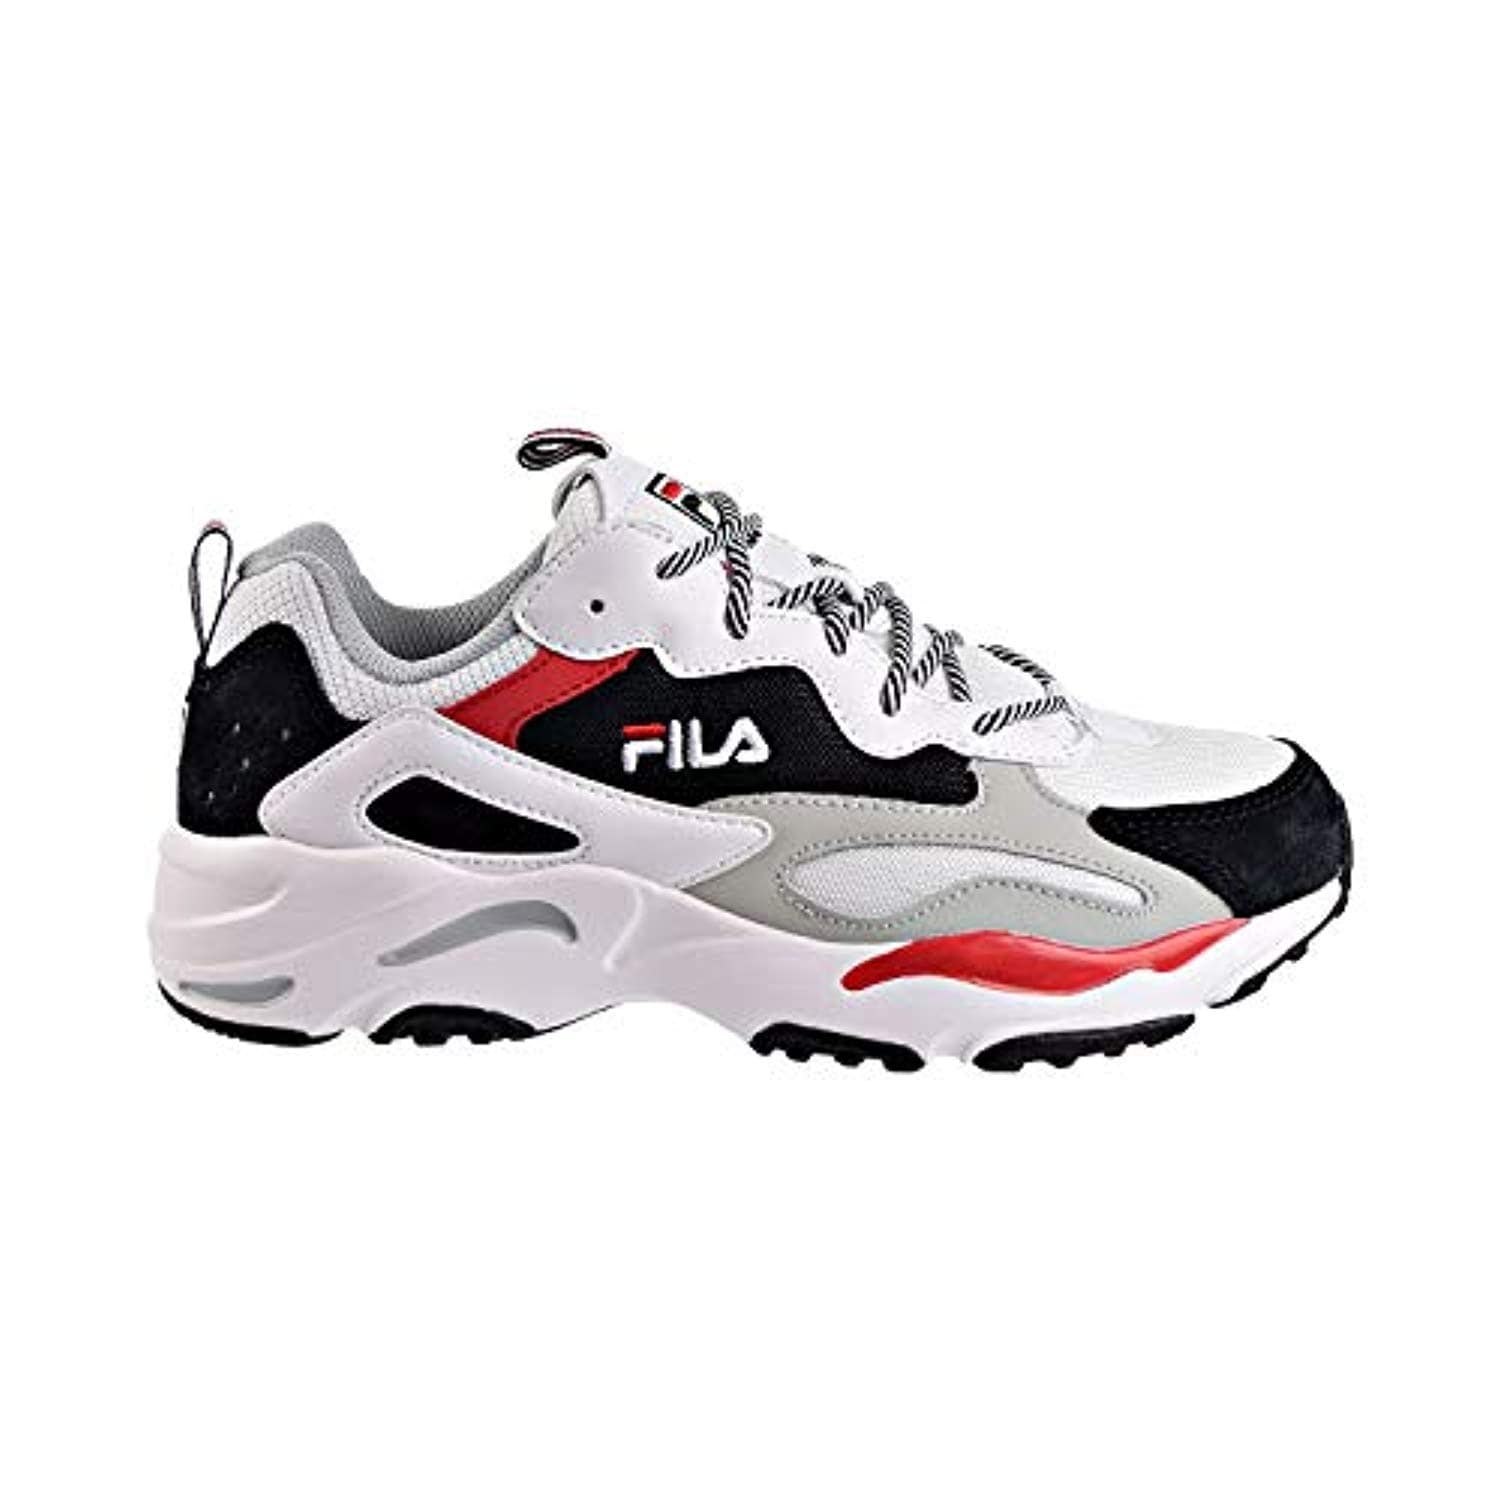 fila black and red shoes